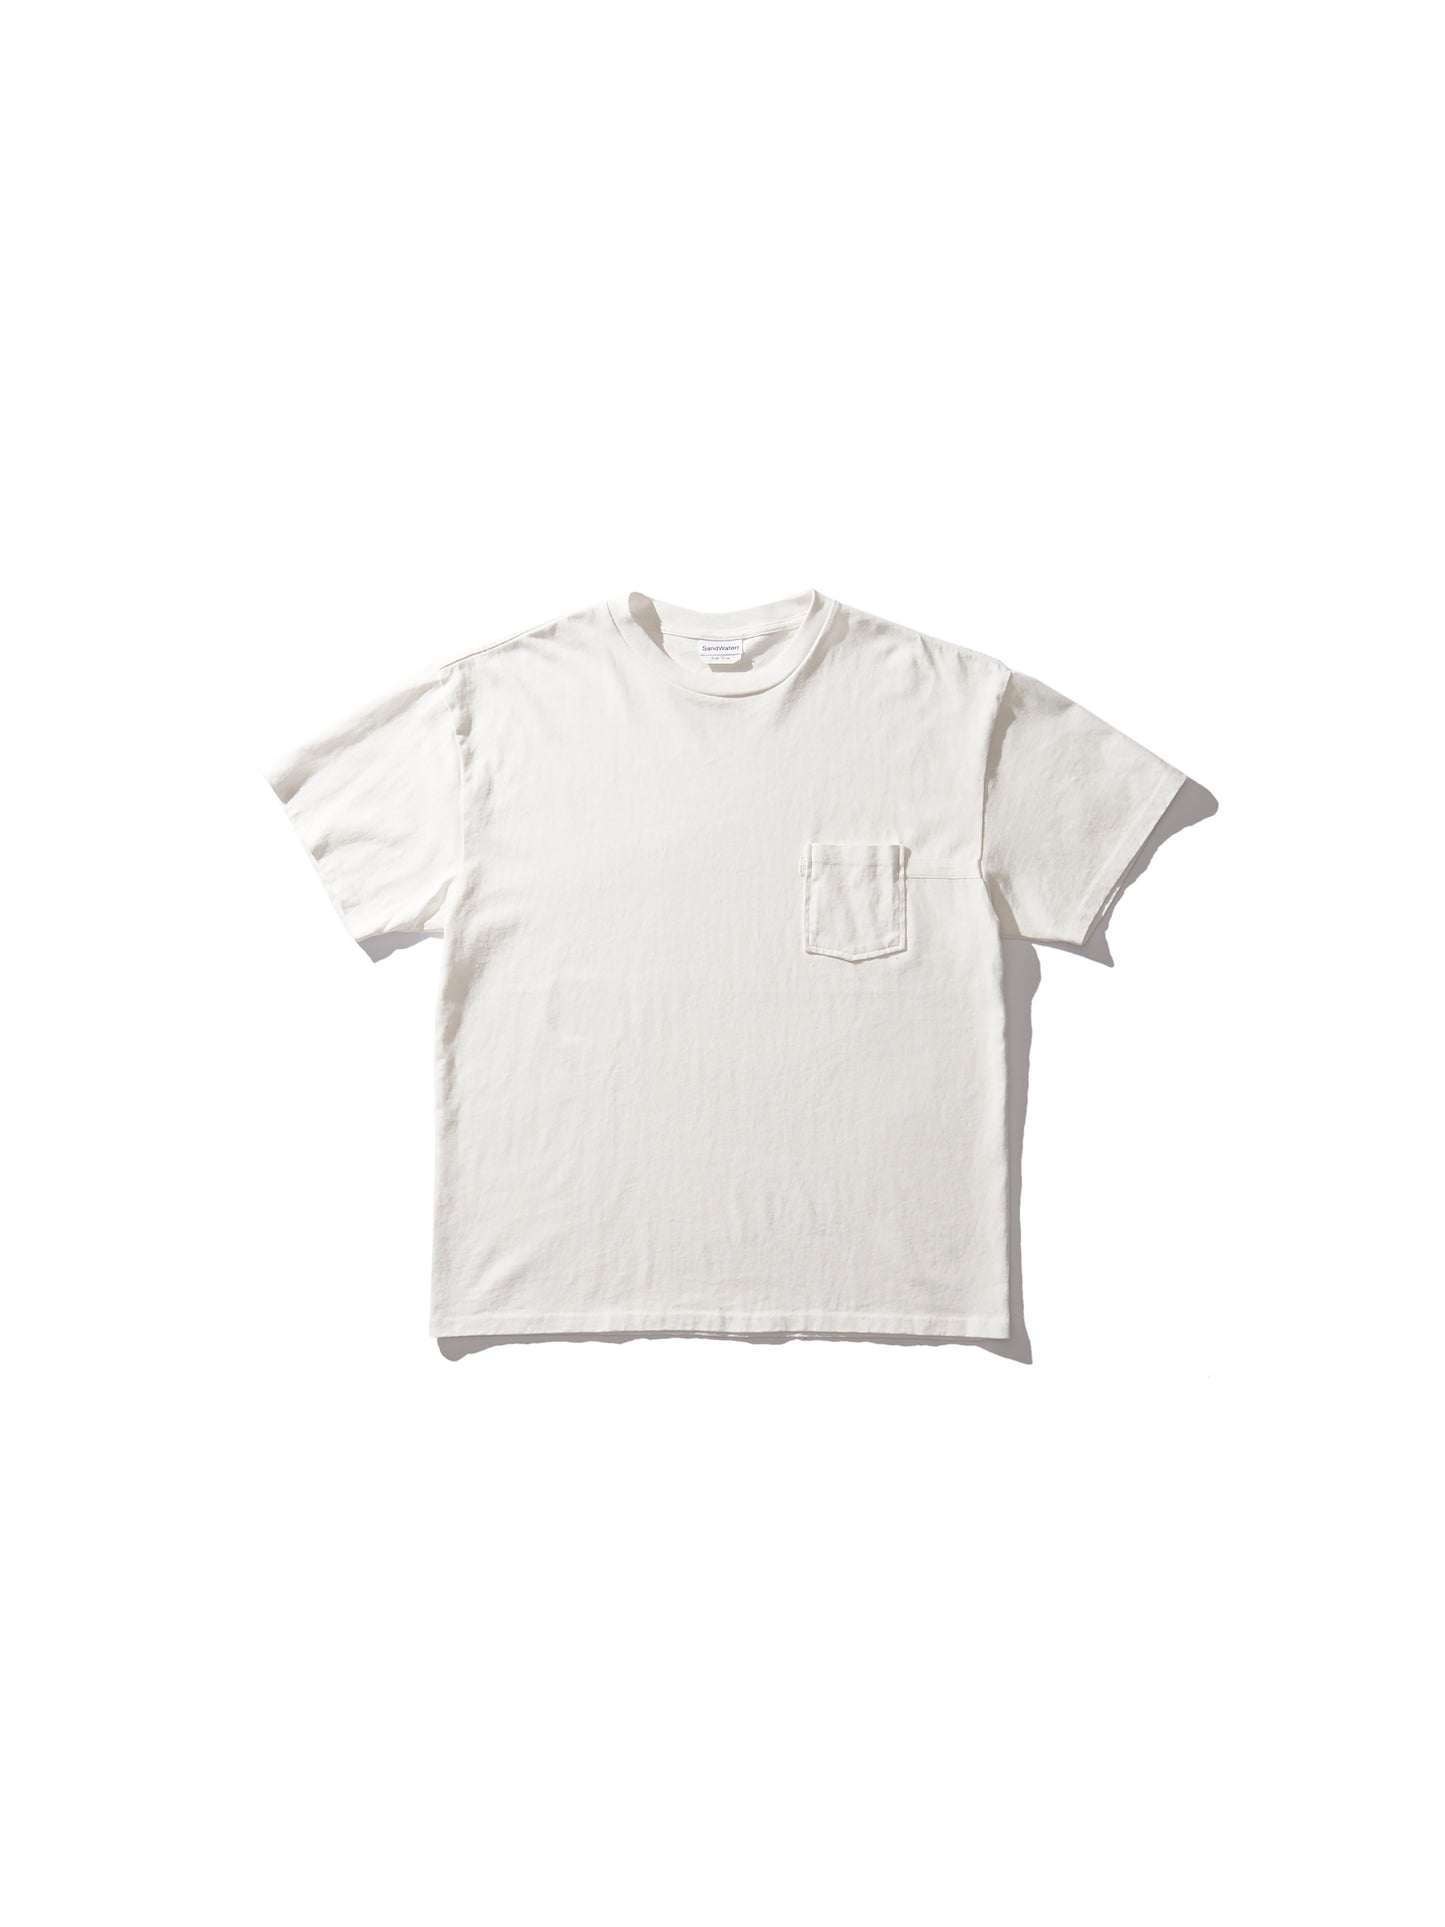 RESEARCHED POCKET TEE SS / 10.5 oz C.JERSEY